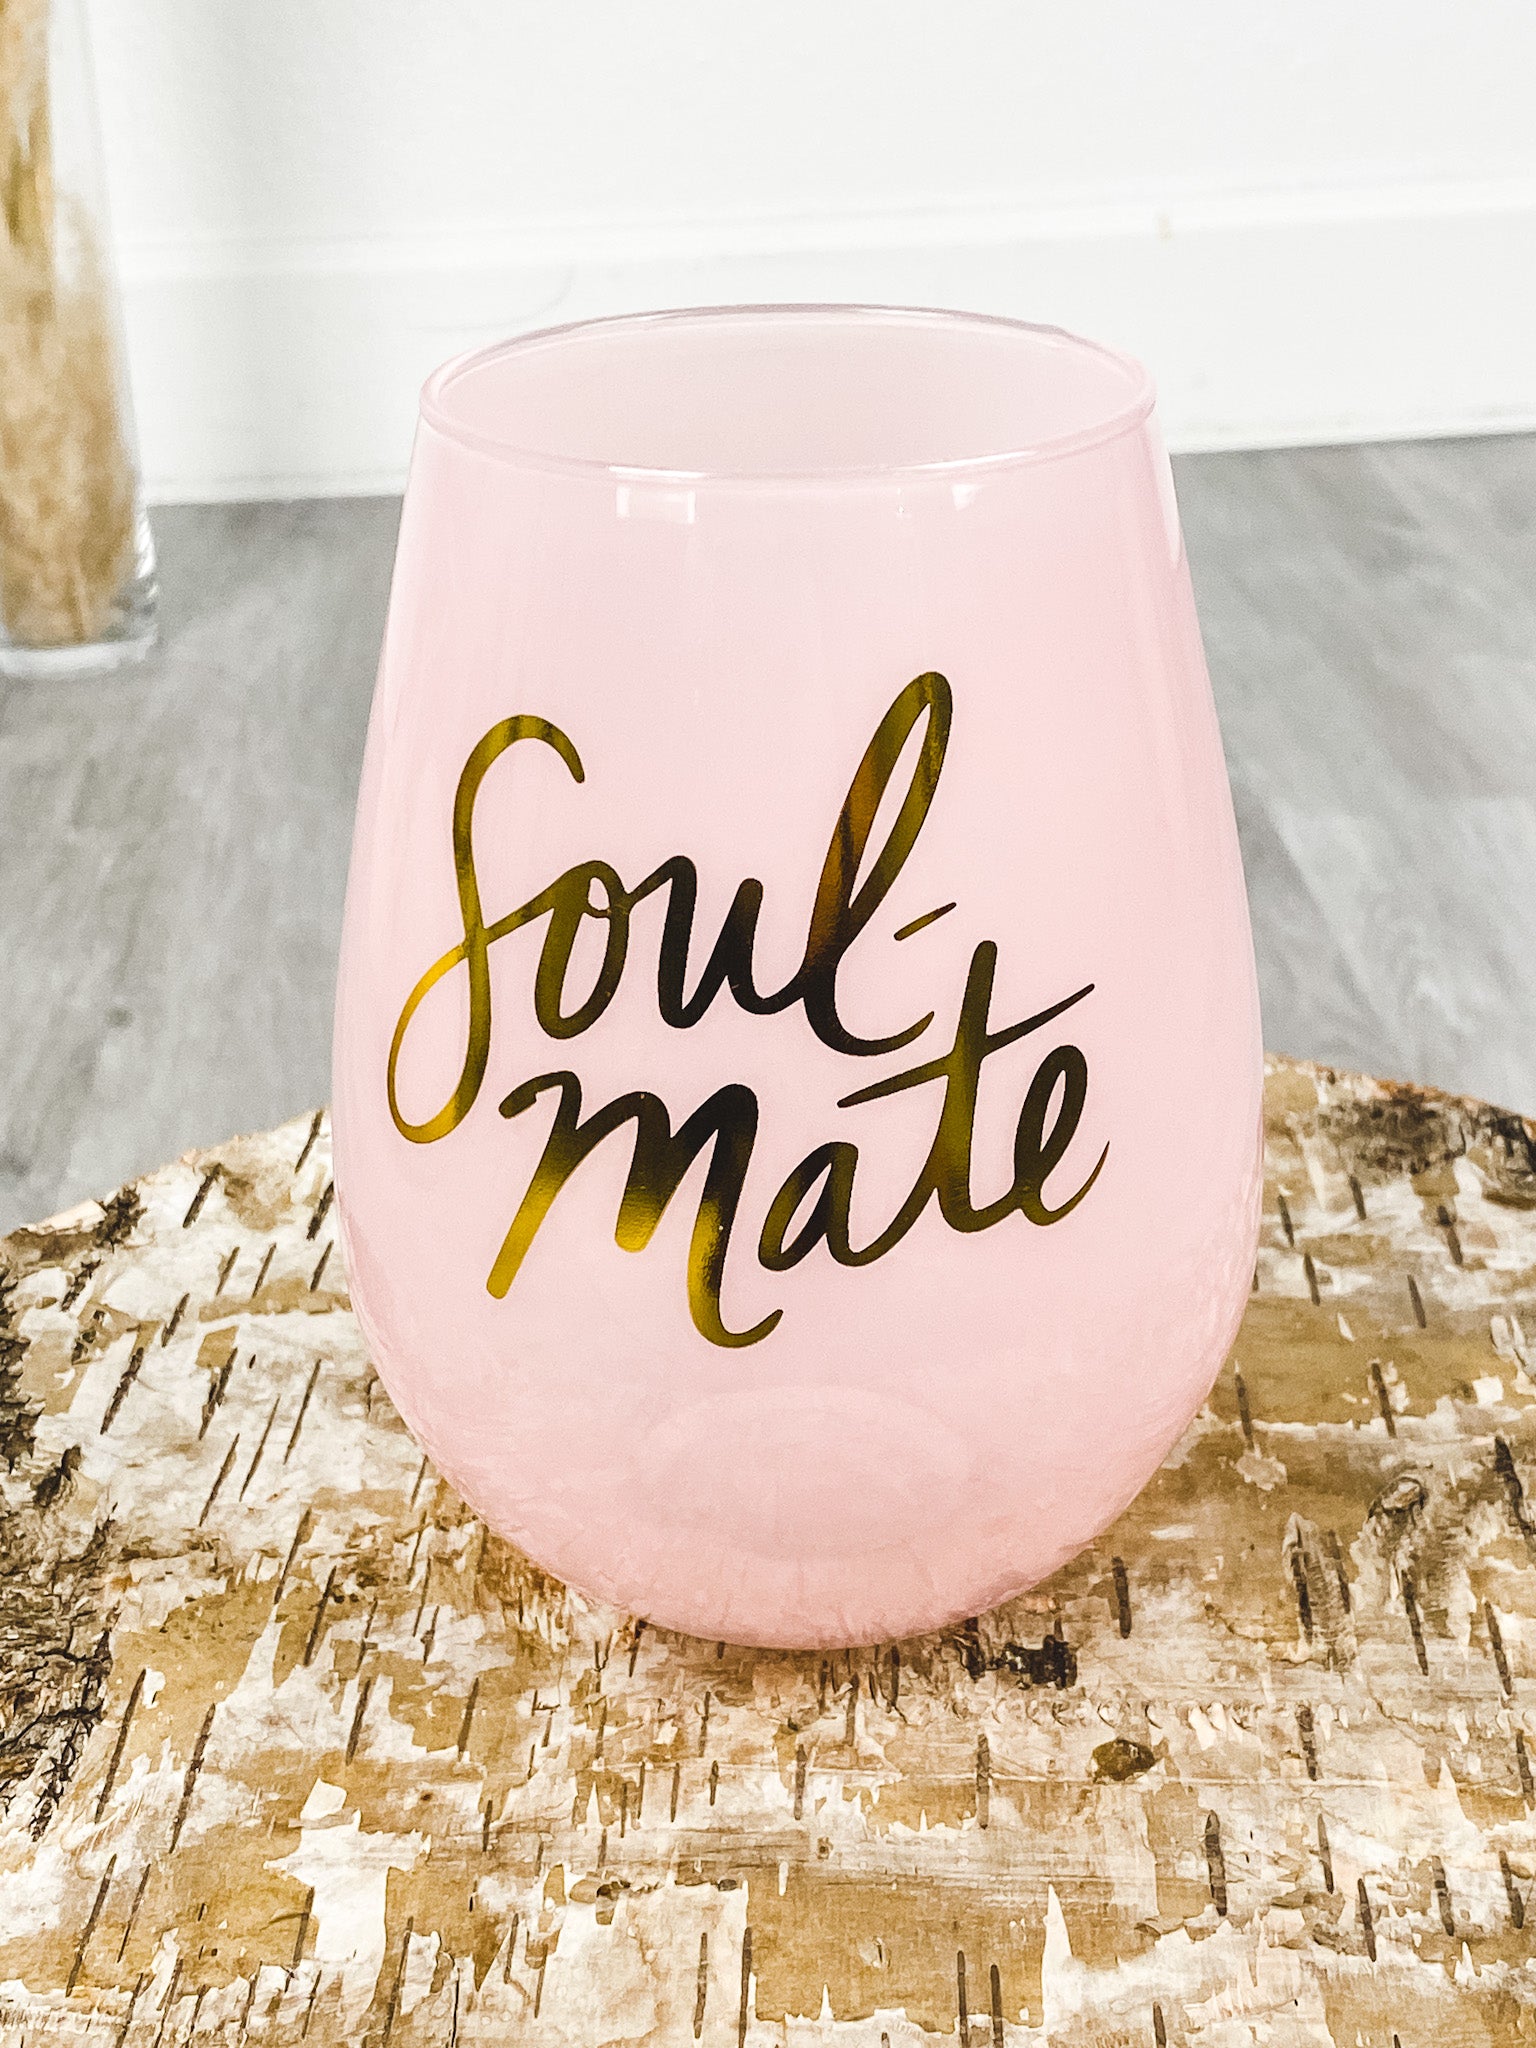 Soulmate jumbo wine glass - Trendy Tumblers, Mugs and Cups at Lush Fashion Lounge Boutique in Oklahoma City